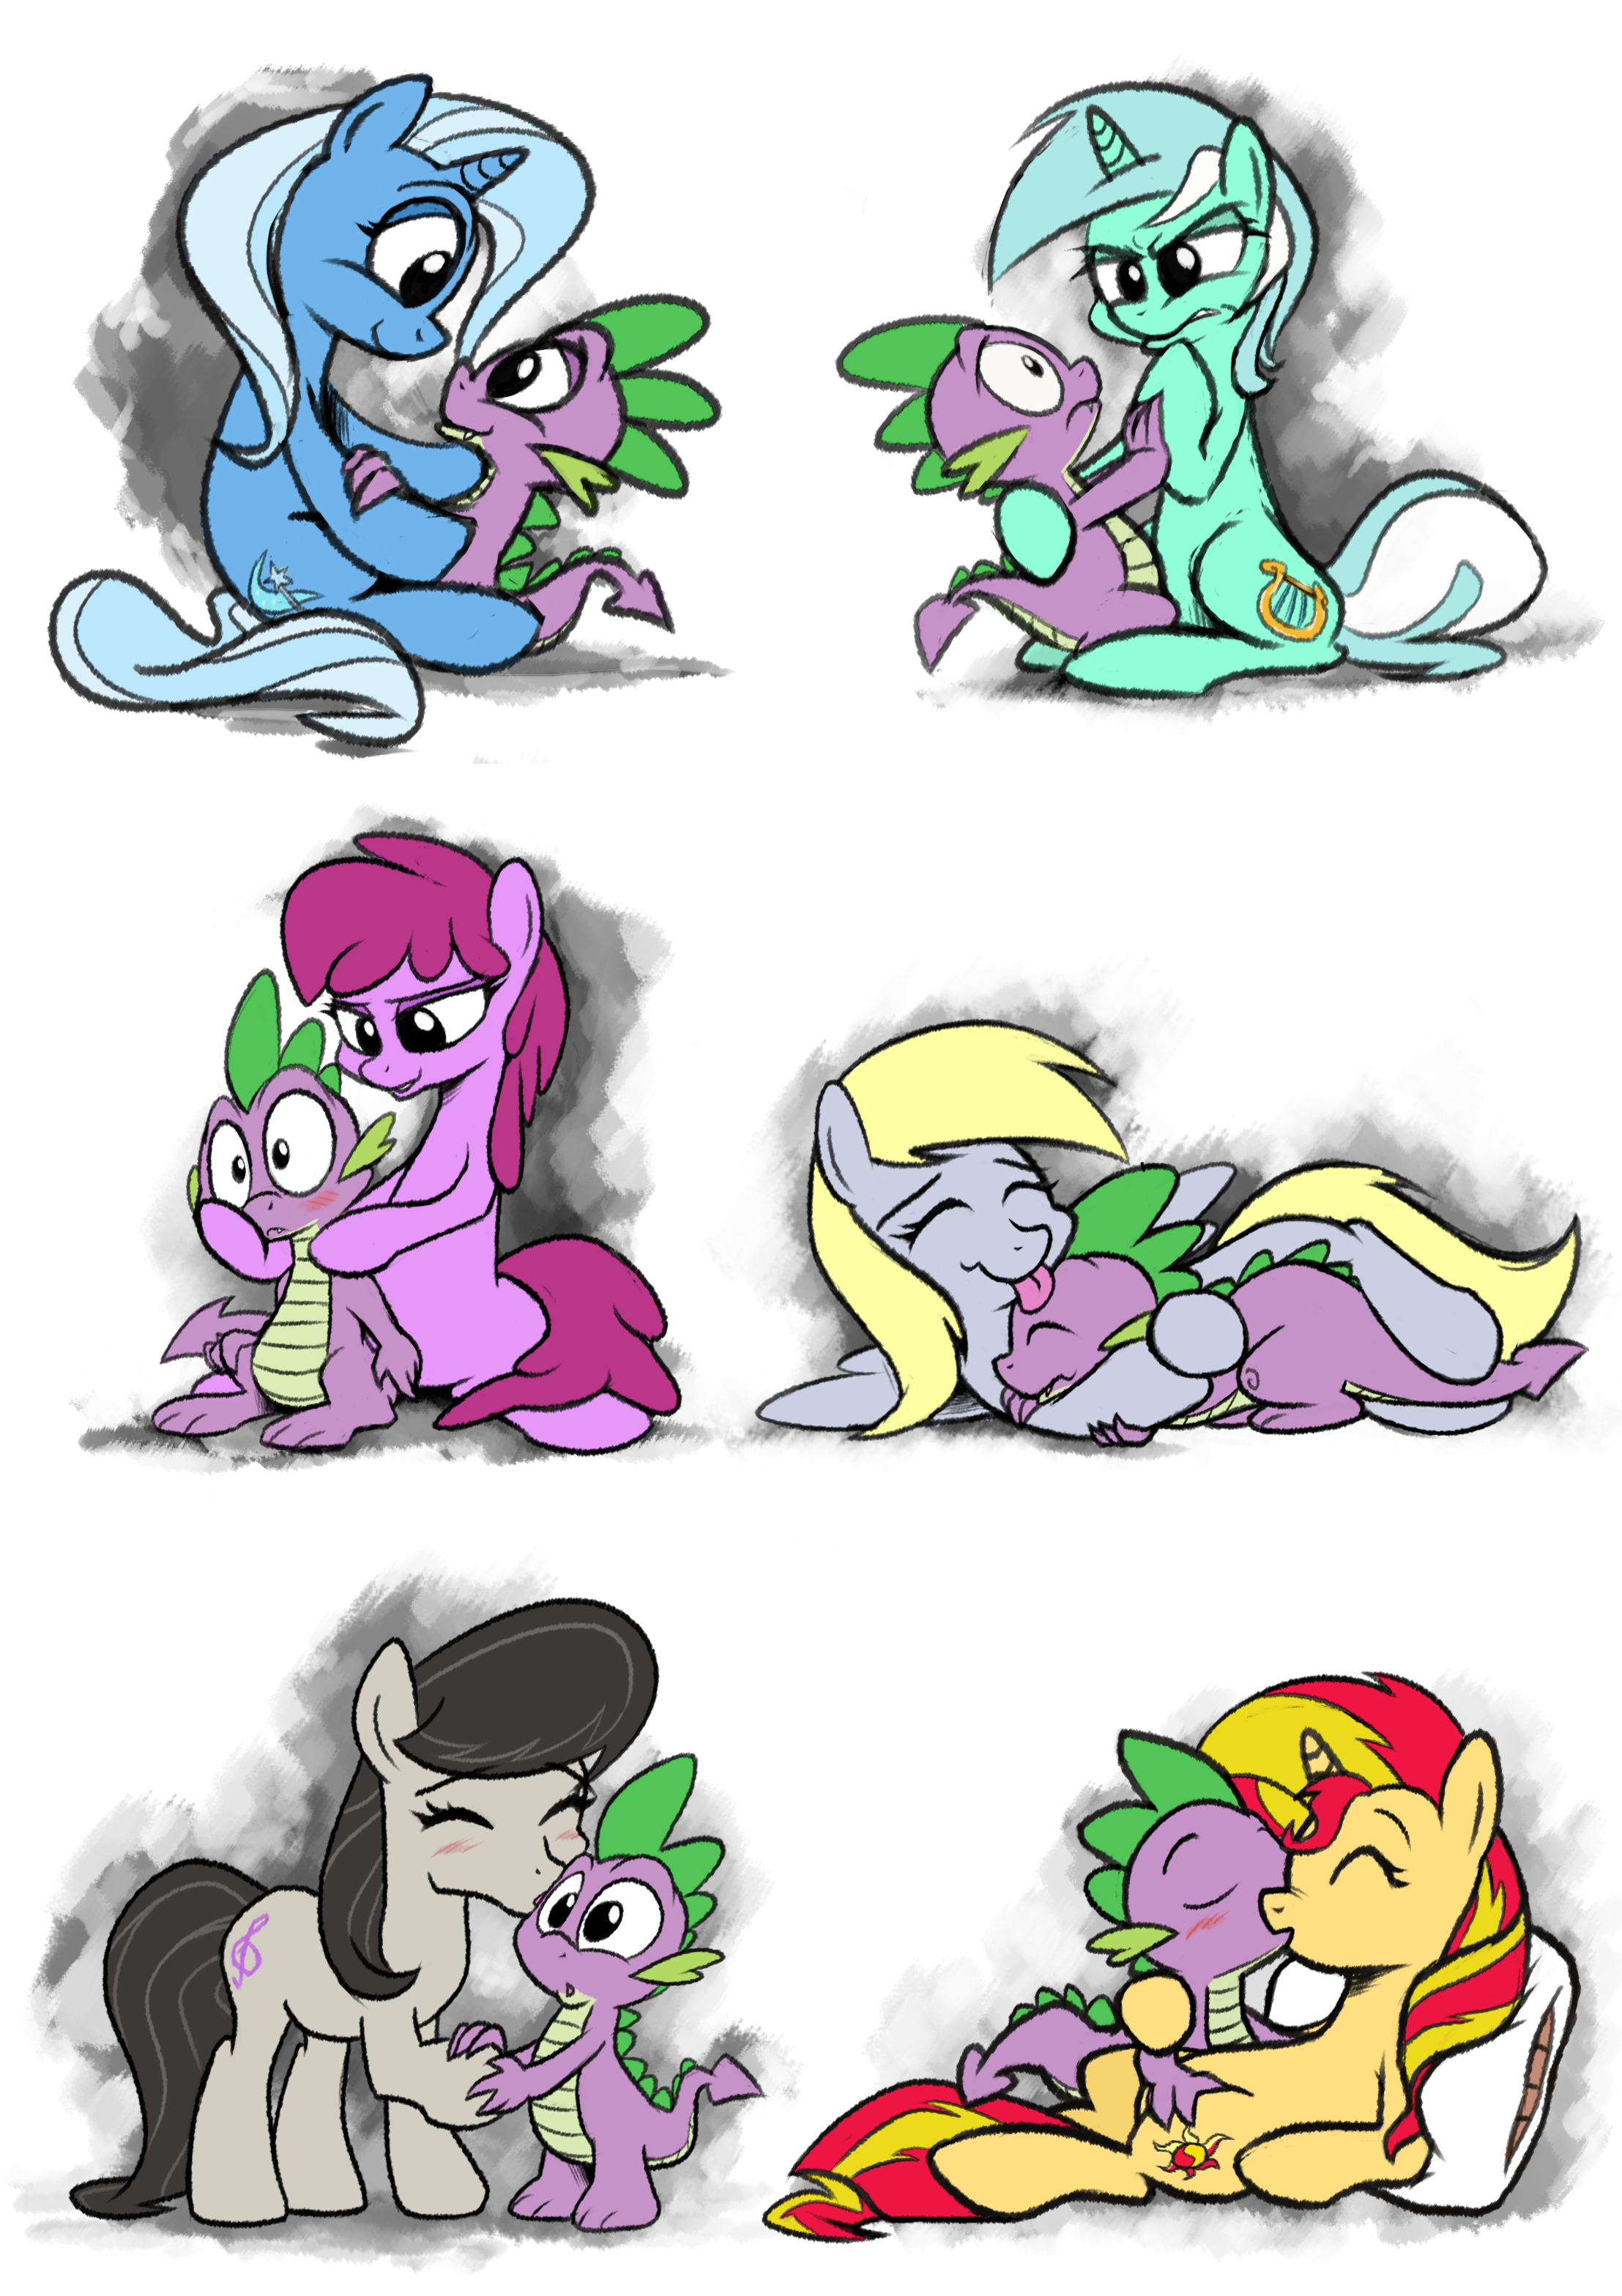 Are you still shipping Spike with Rarity only?